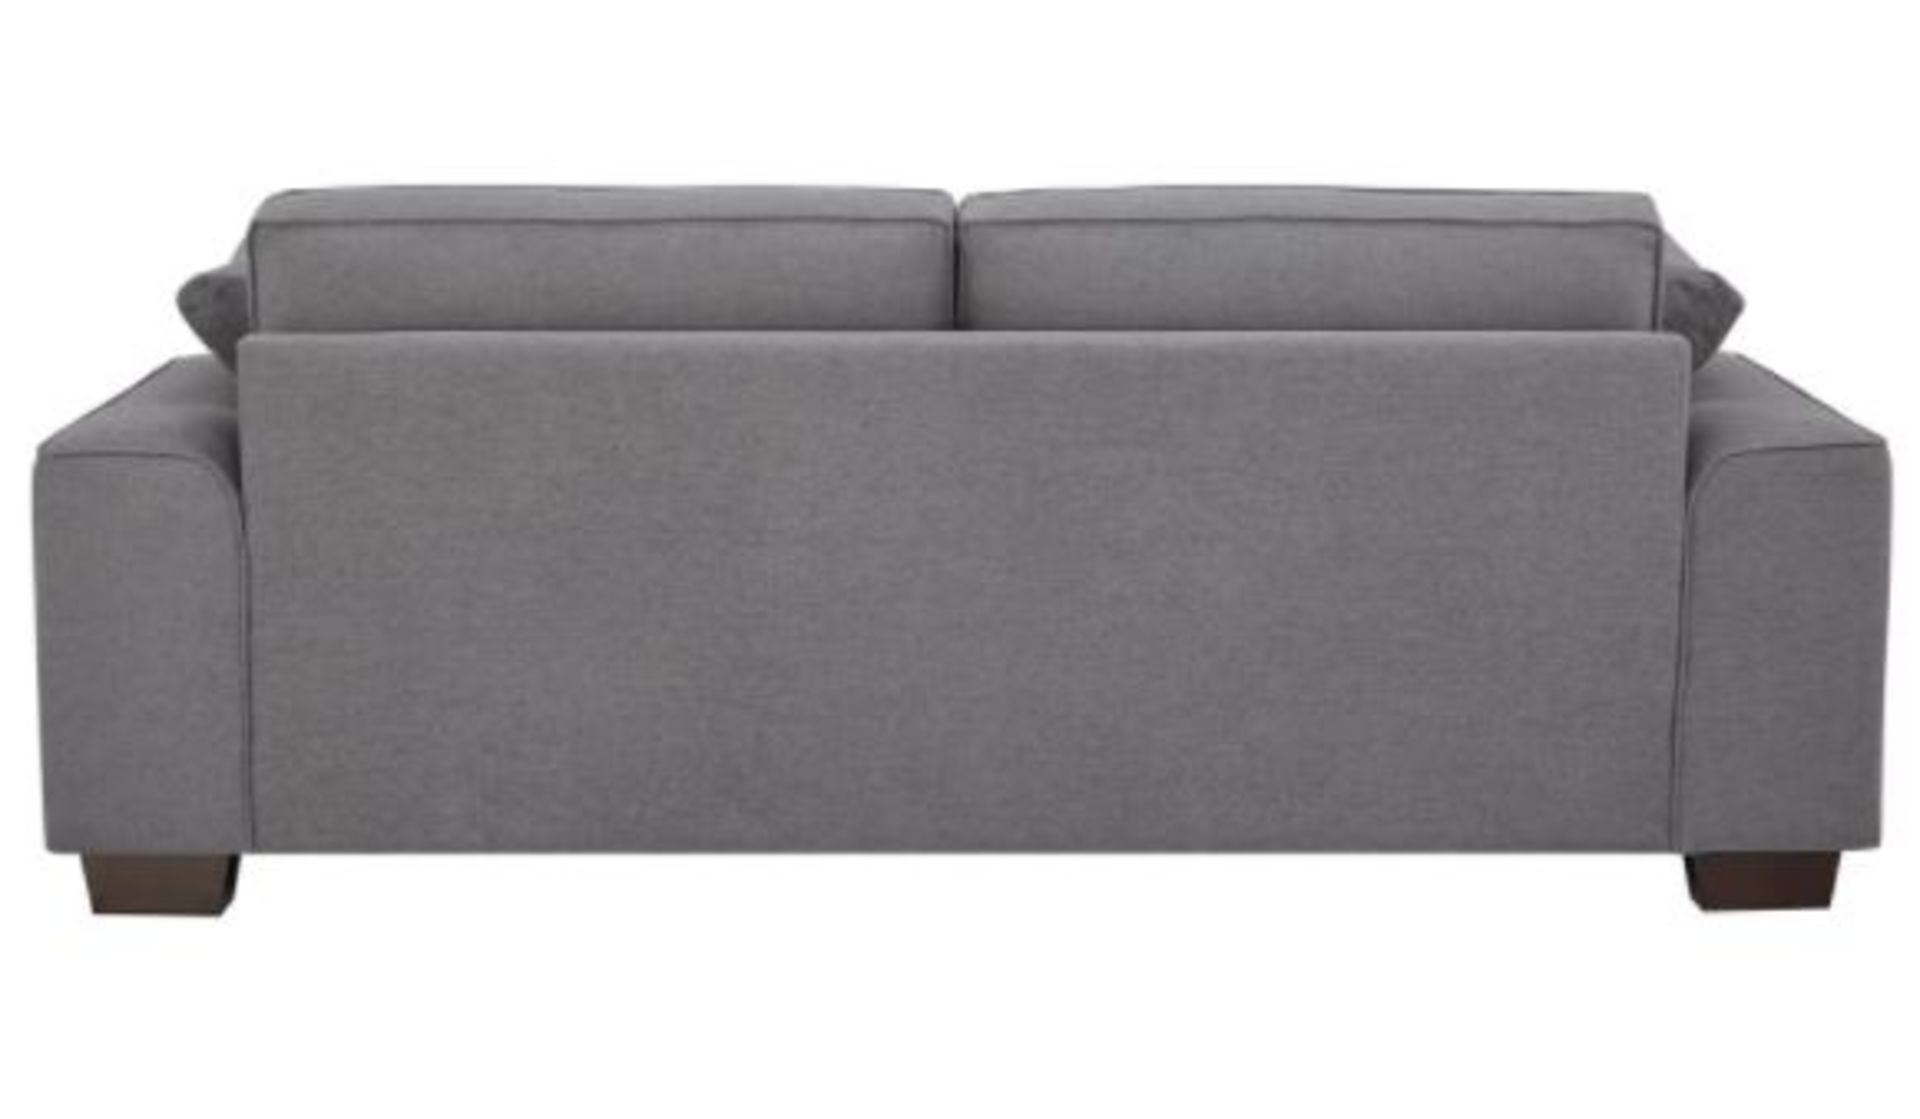 1 X Lola Sofa Charcoal. Wooden Frame With Solid Beechwood Legs. 100% Polyester Fabric Cover (H80xW2 - Image 5 of 6